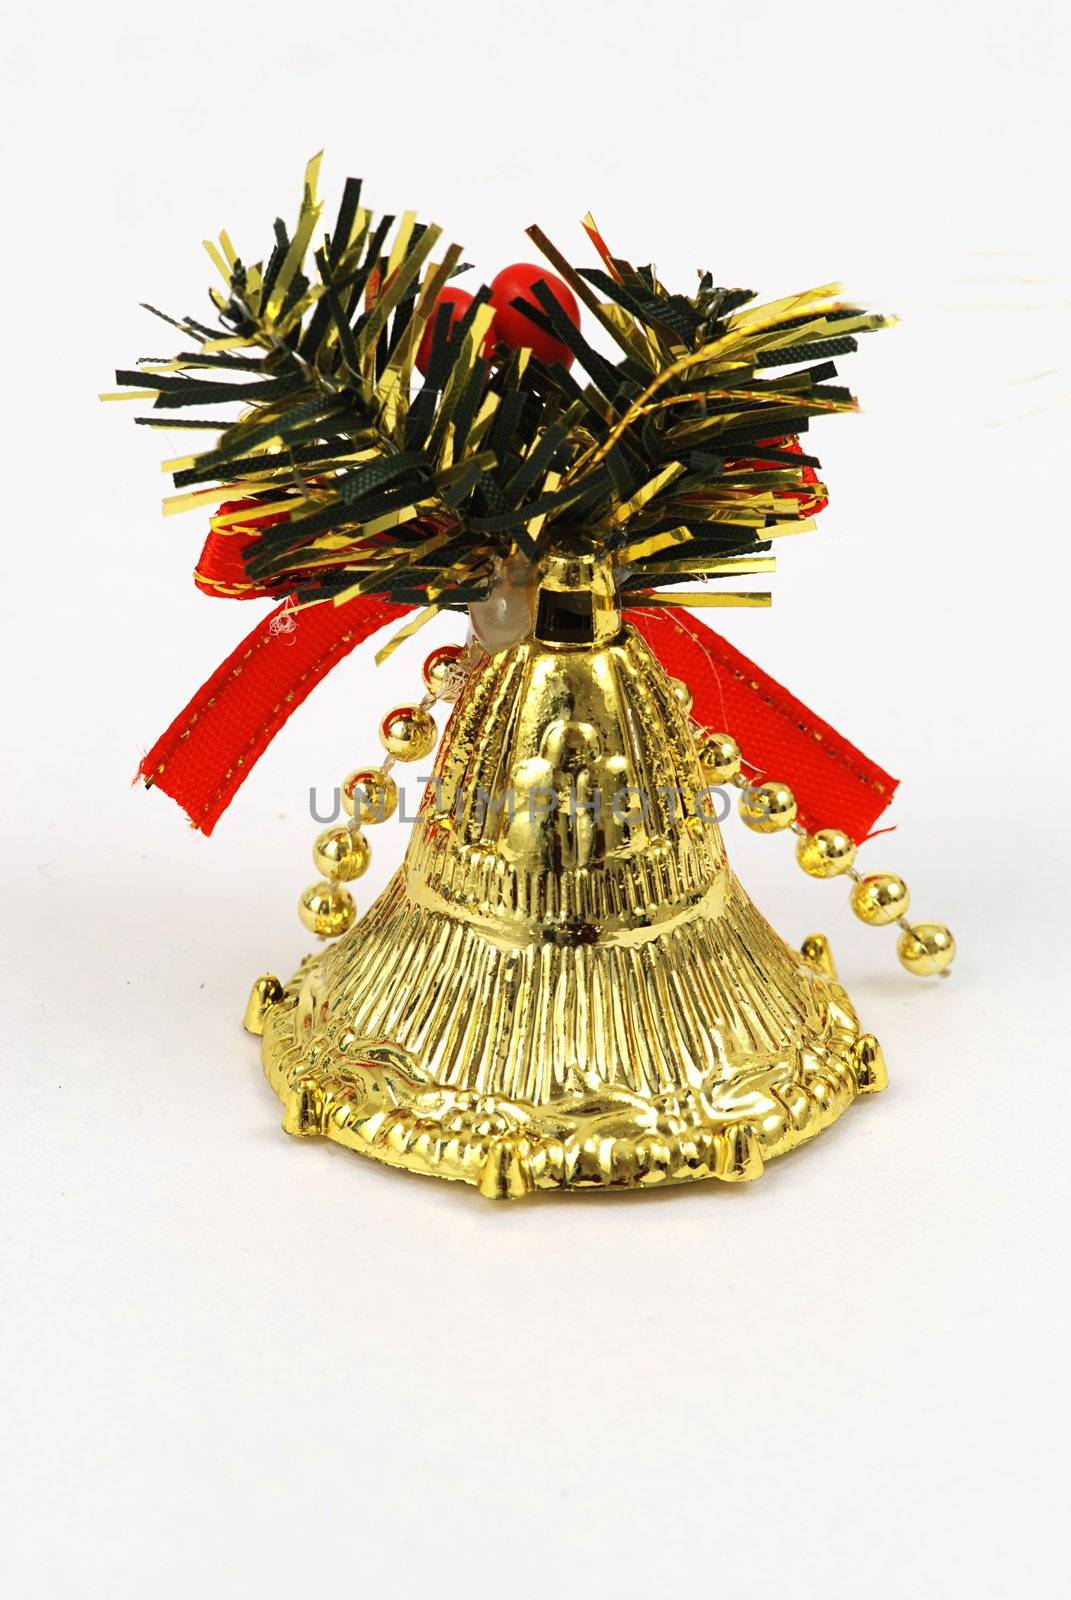 Golden Christmas bell decoration isolated on white